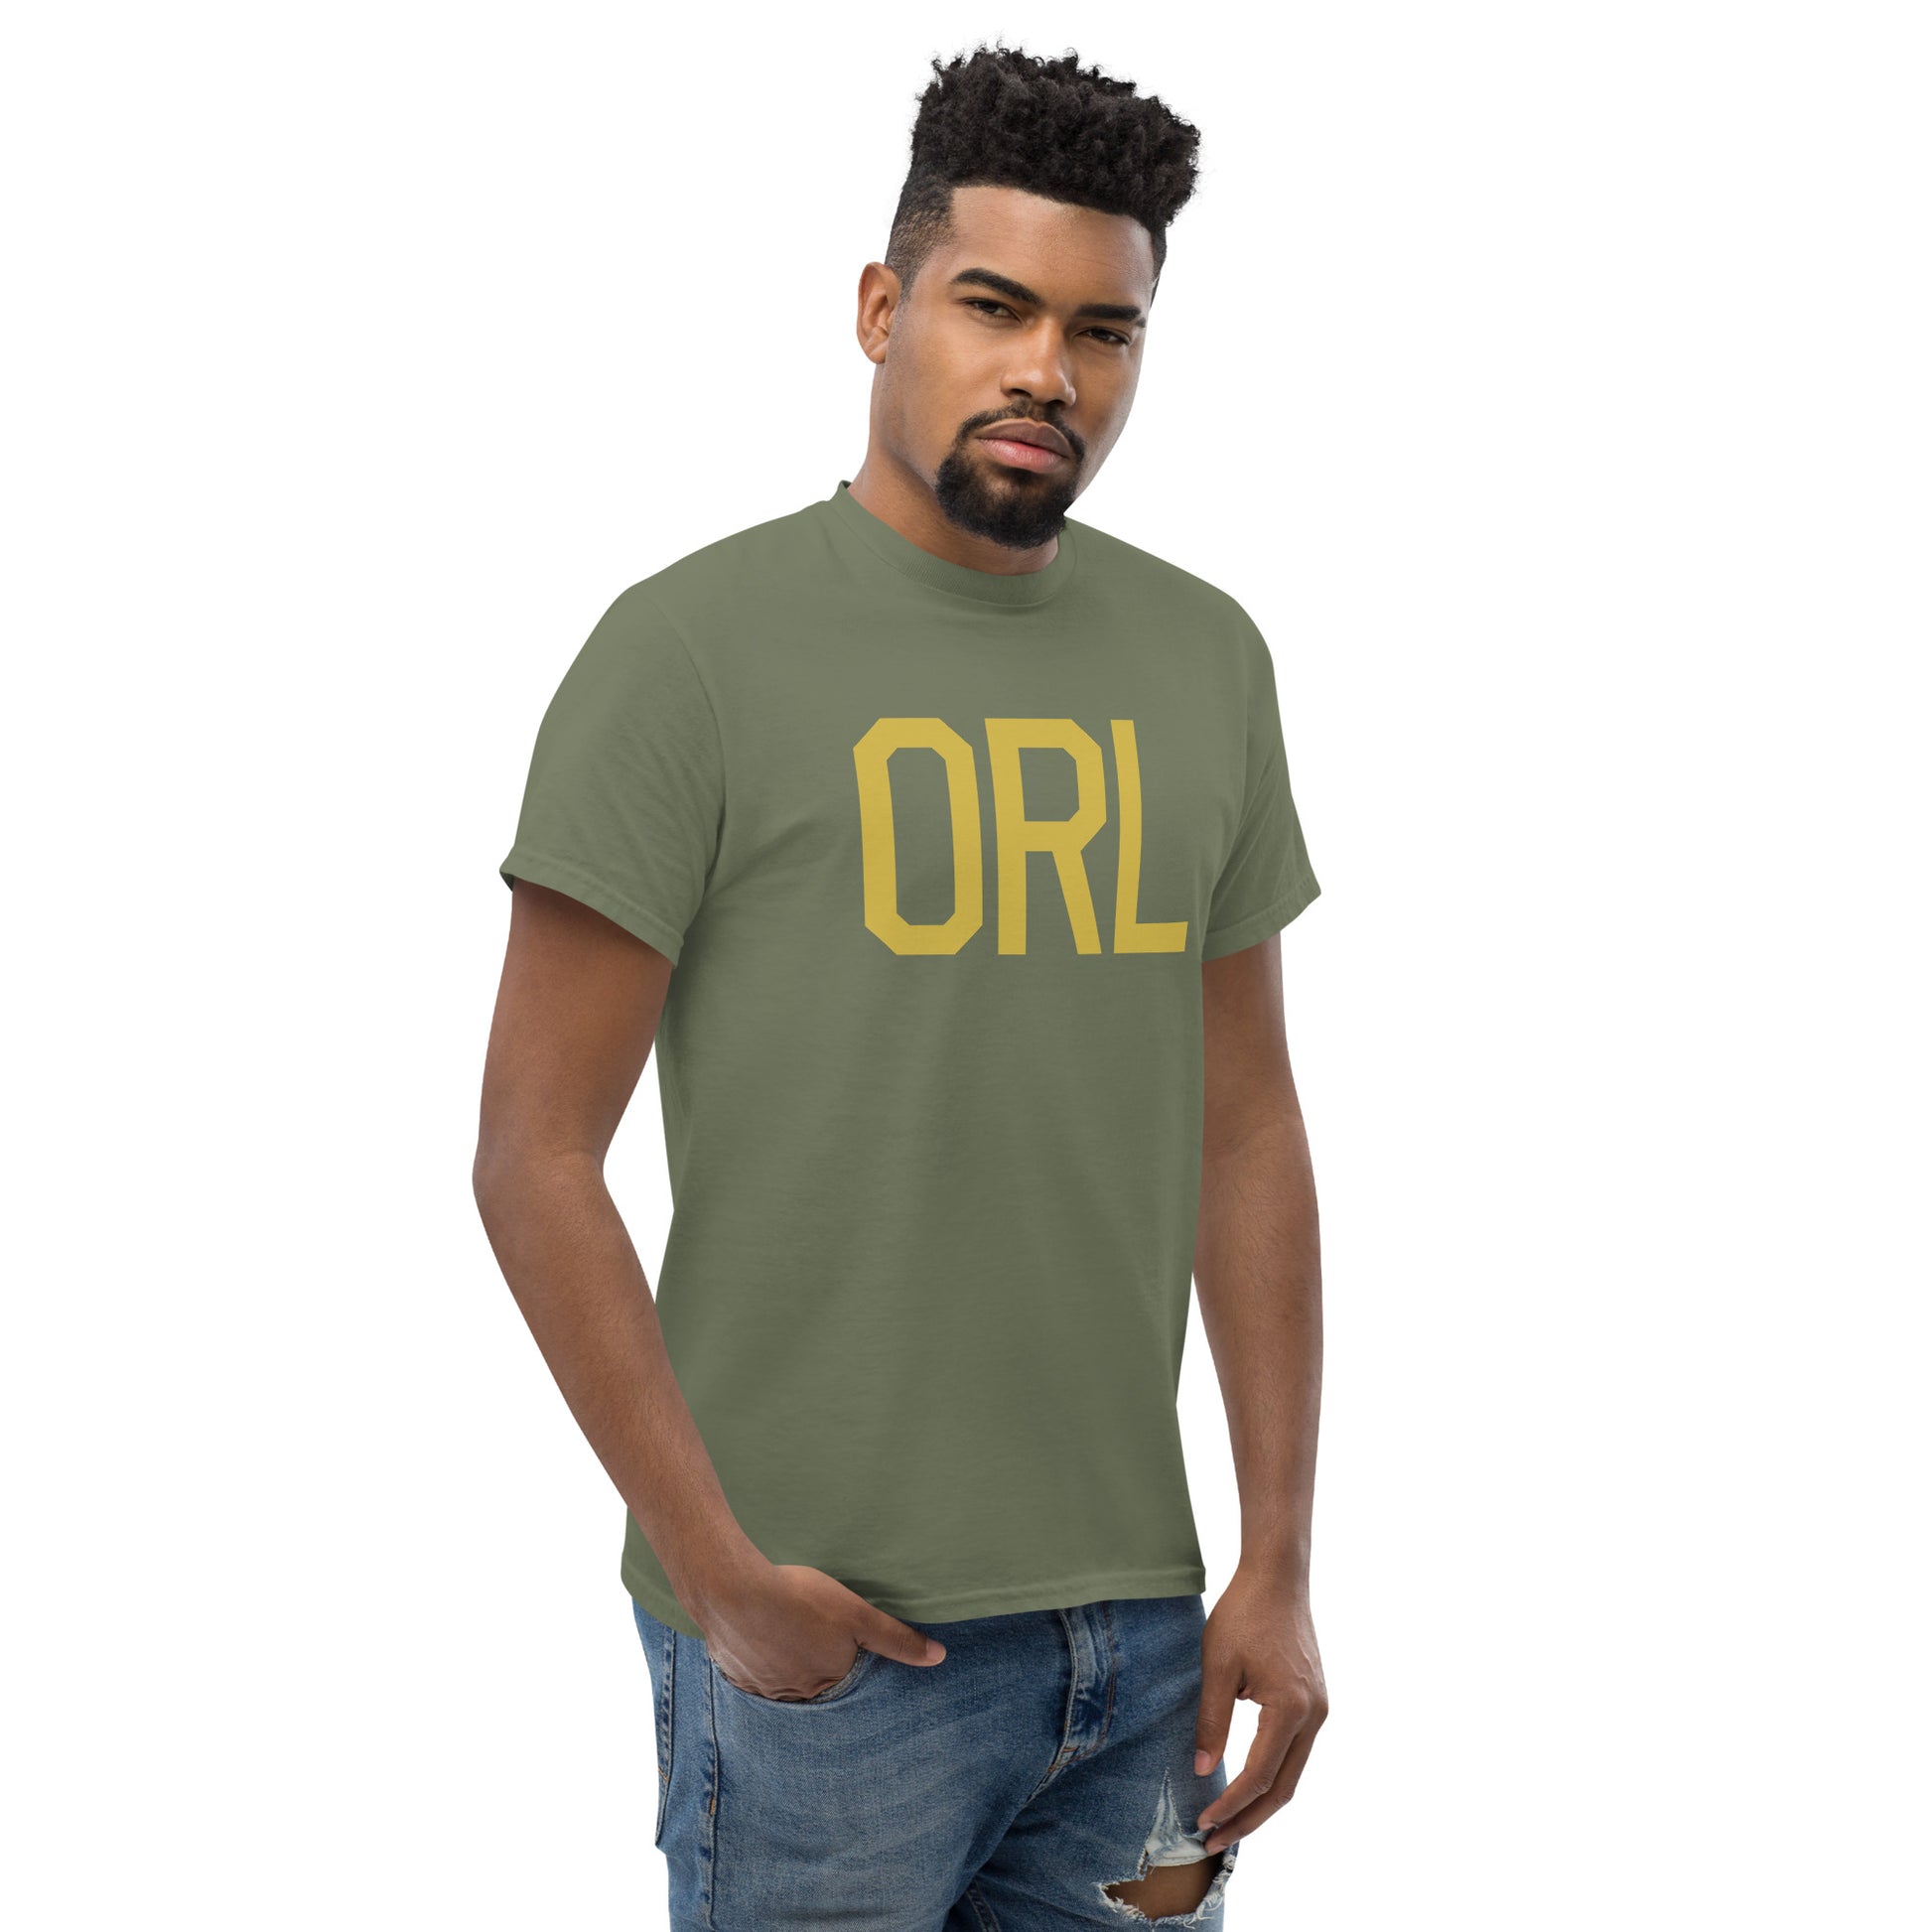 Aviation Enthusiast Men's Tee - Old Gold Graphic • ORL Orlando • YHM Designs - Image 08